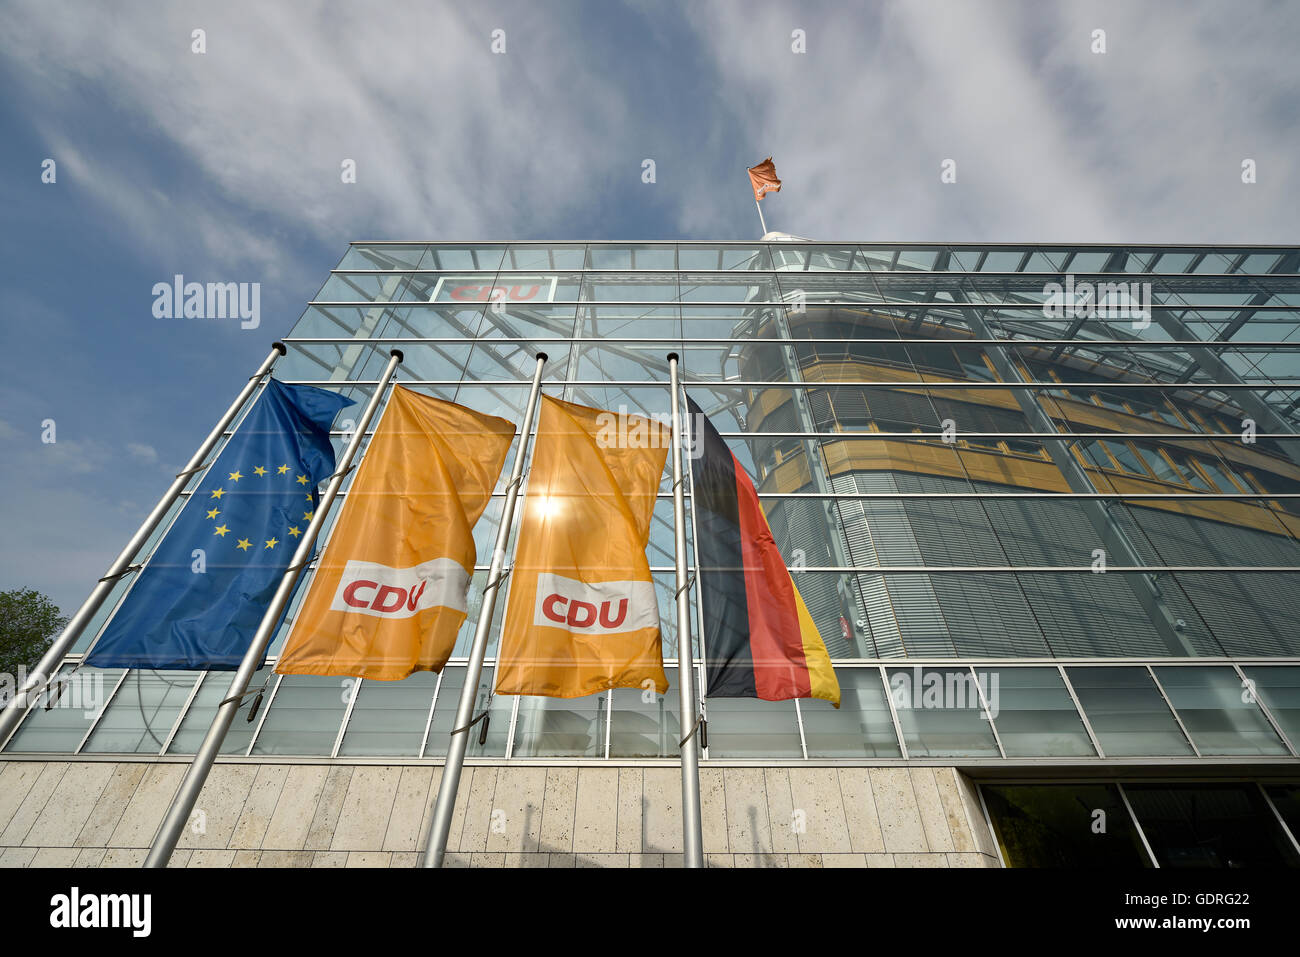 Streaming Flags at CDU headquarters, office, Berlin, Germany Stock Photo